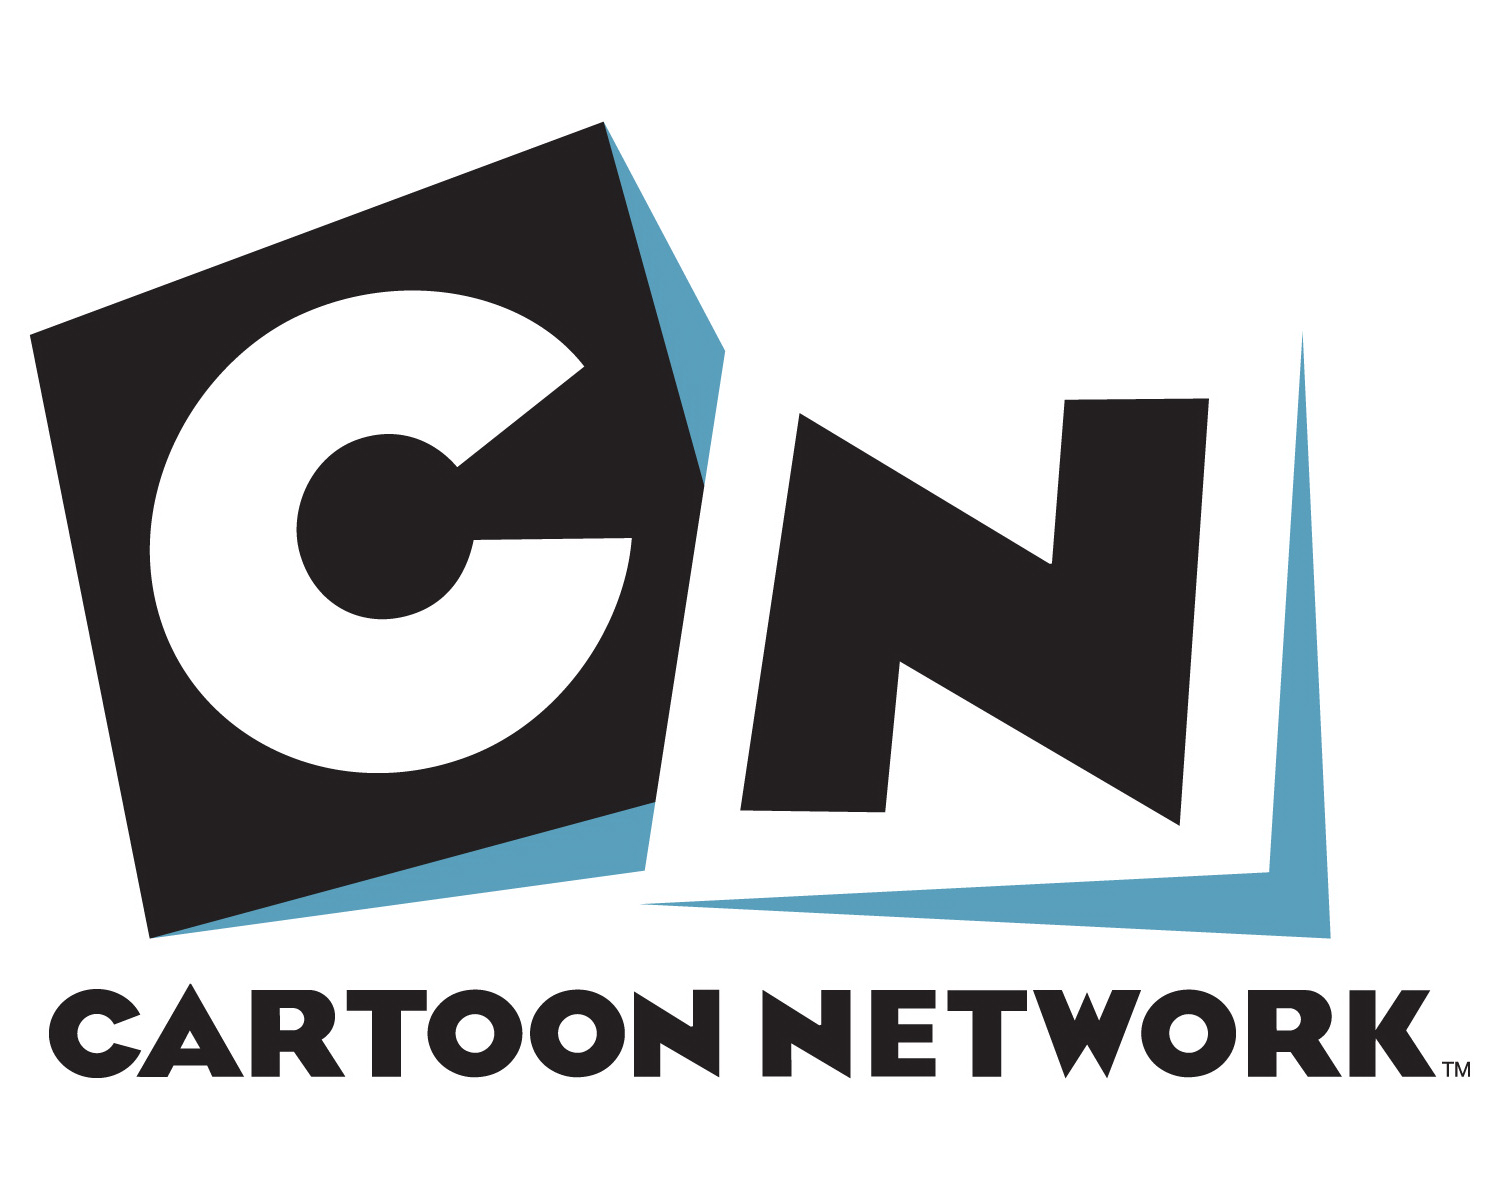 What does the Cartoon Network and Warner Bros. merger mean